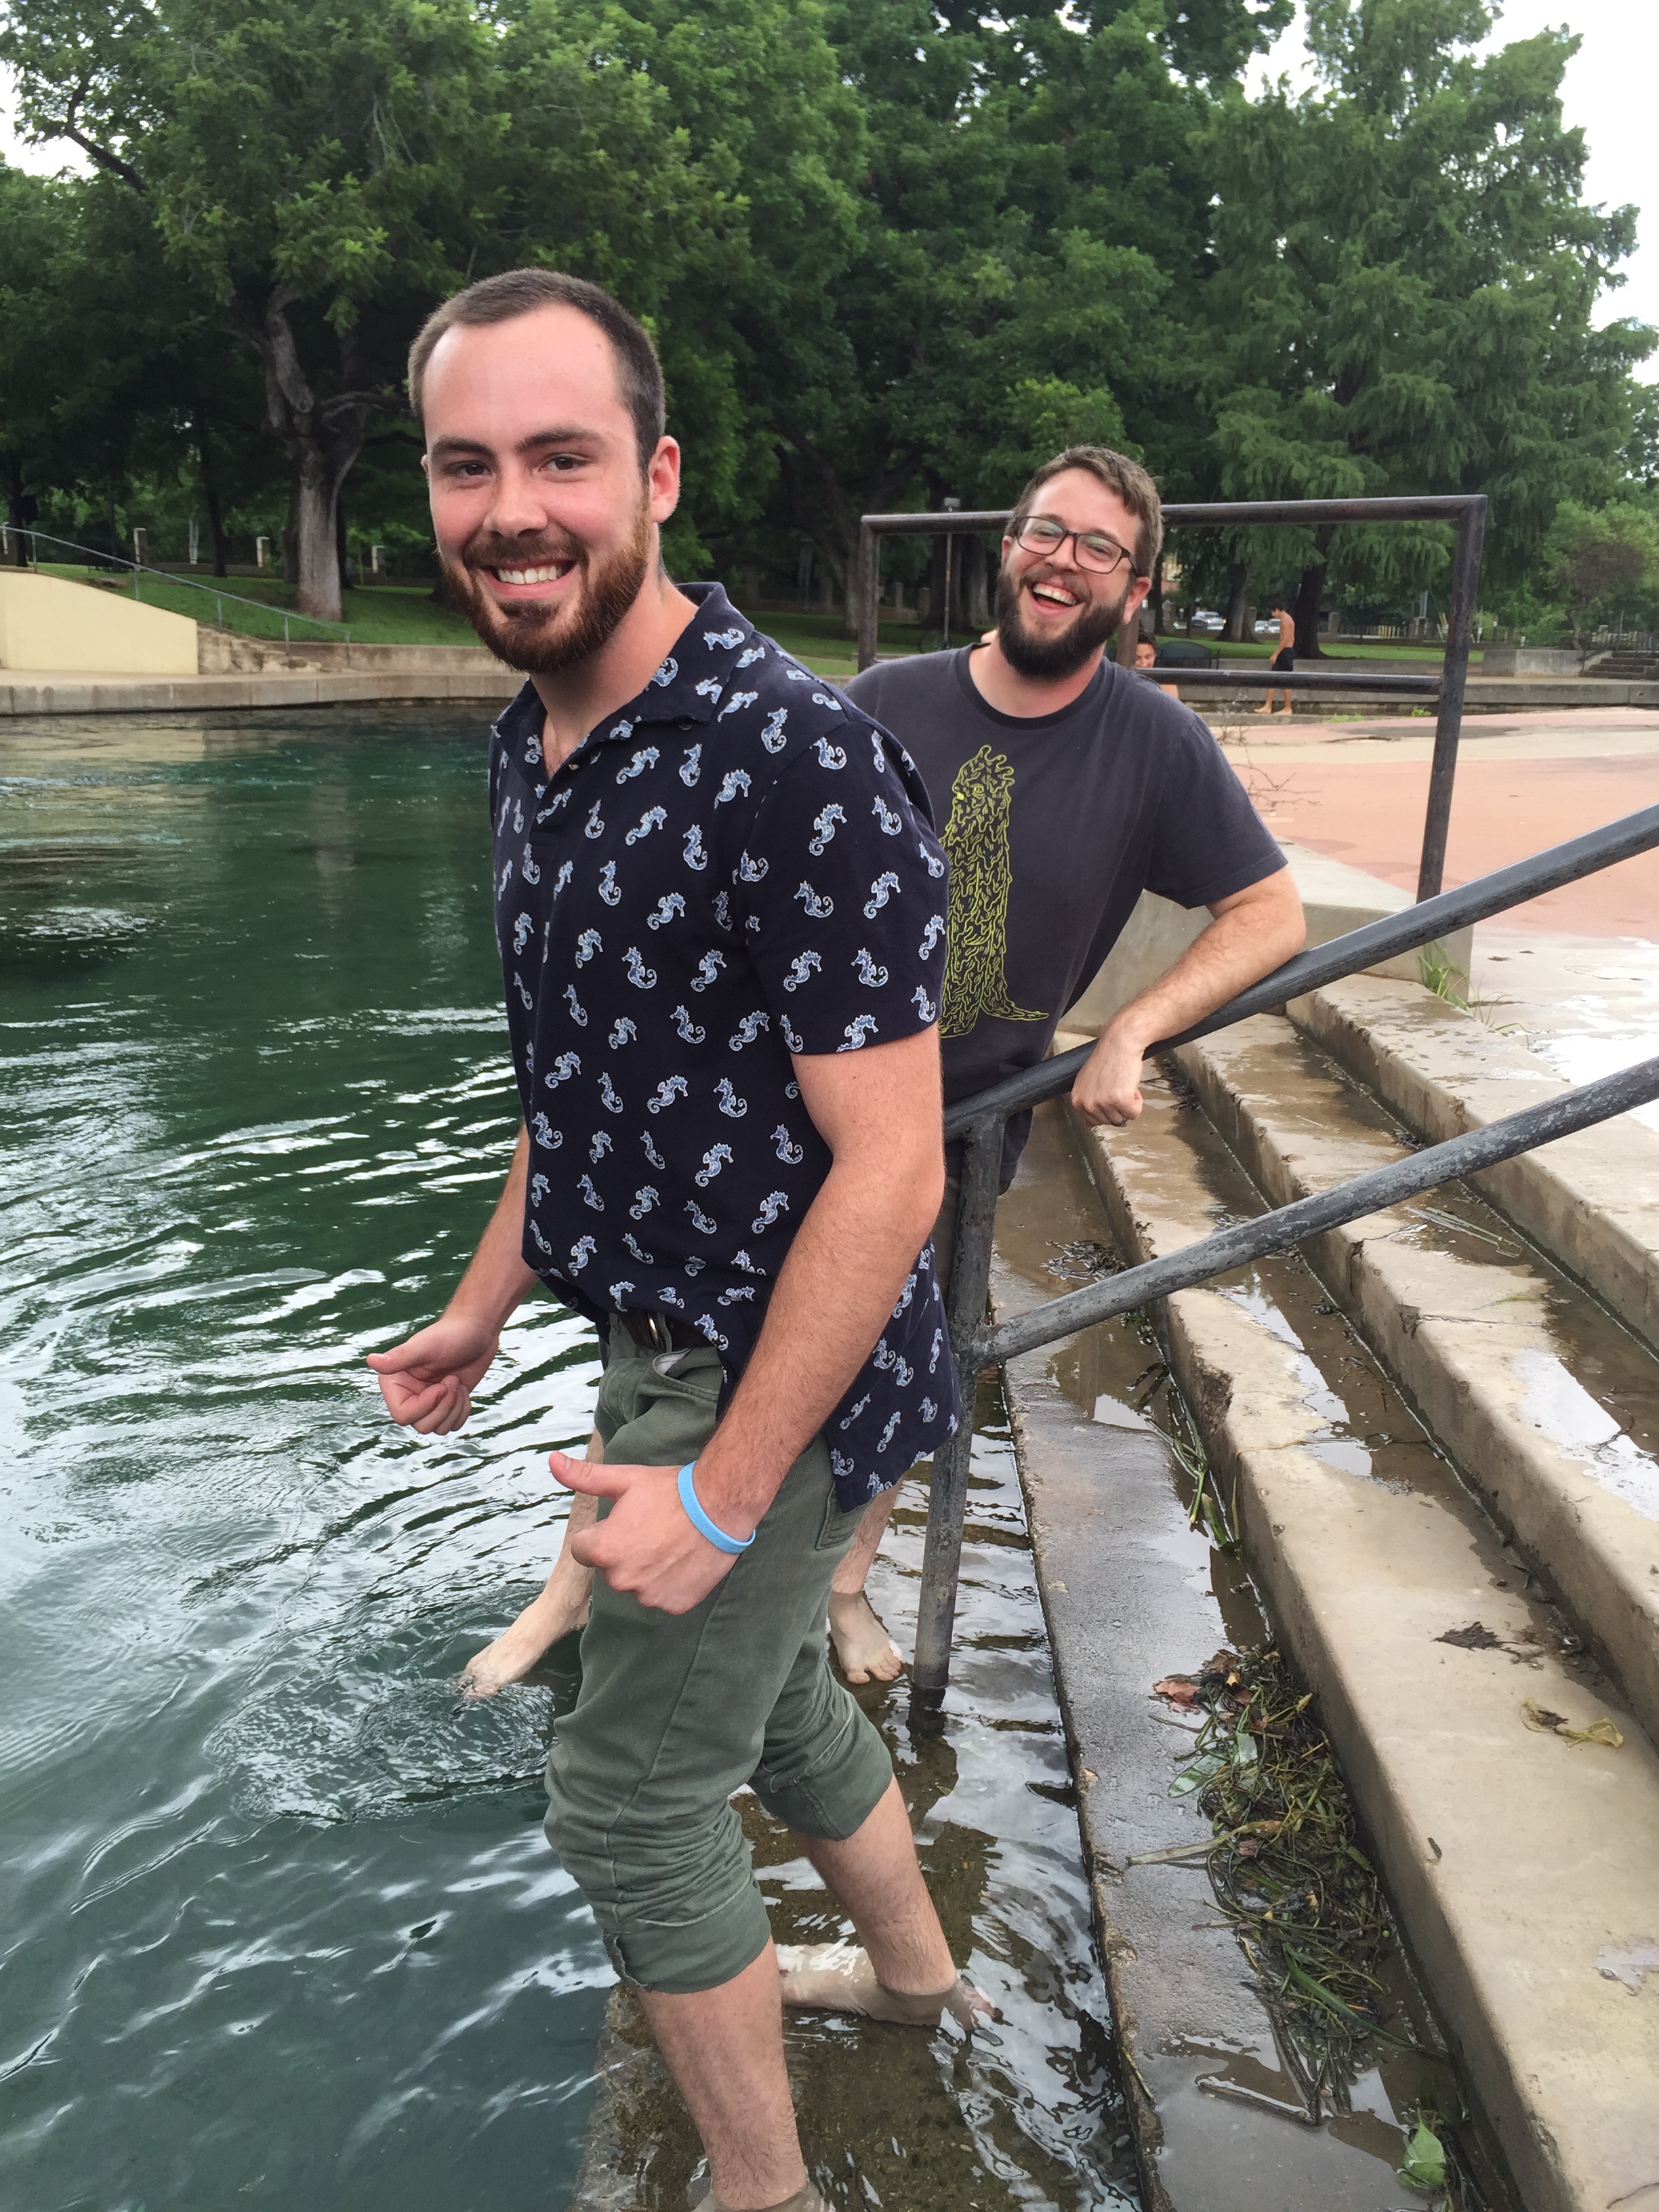 Two Beyond Borders team members giving smiles to the camera as they dip their feet in the San Marcos River on a stair platform leading from the sidewalk into the river